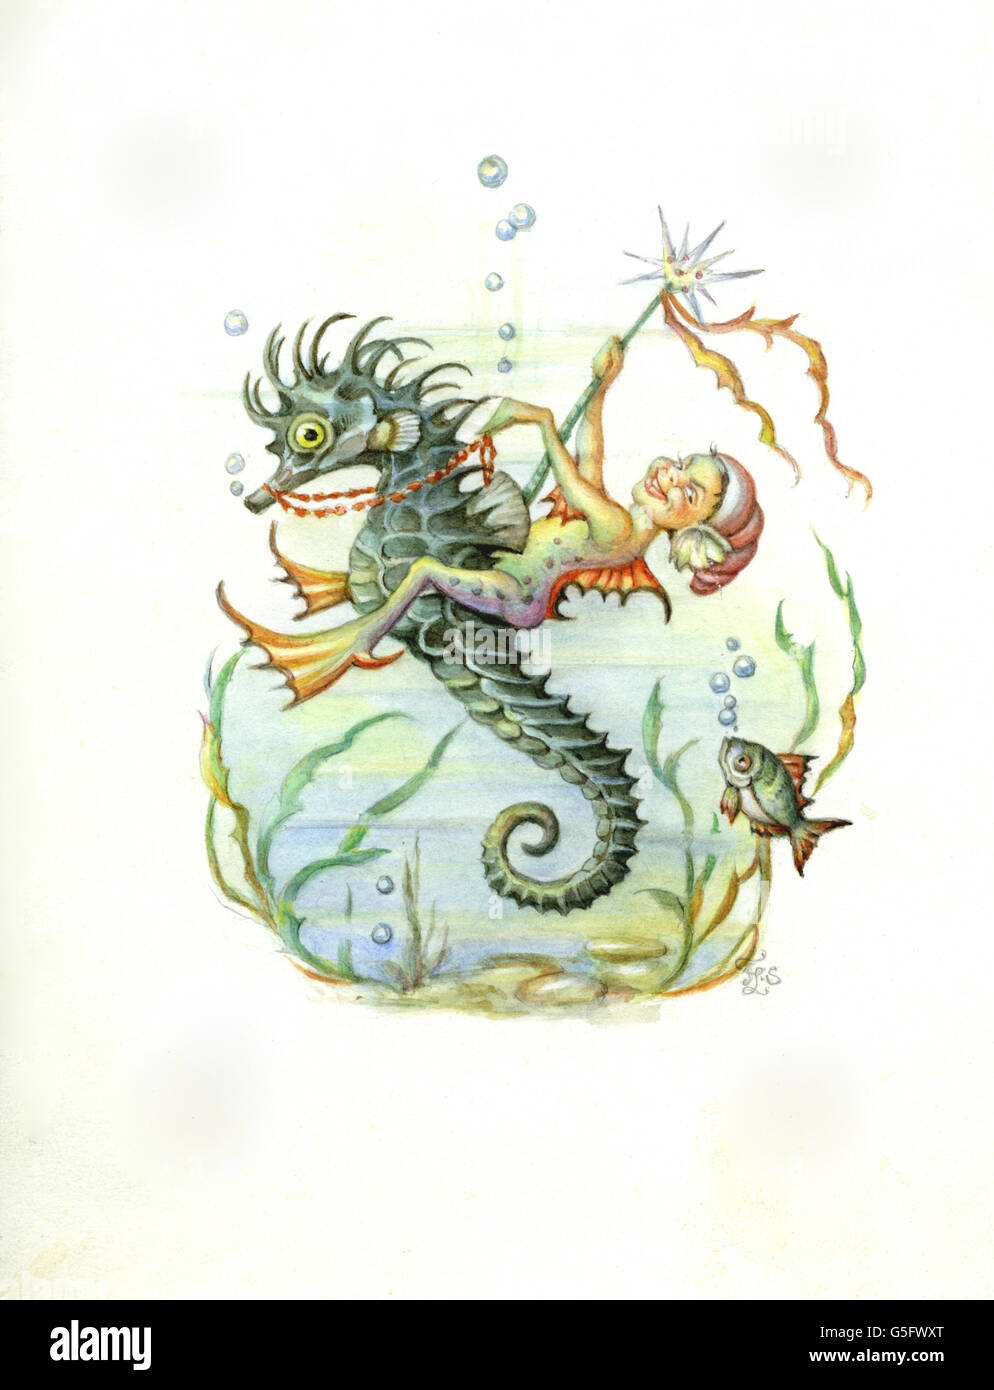 superstition, mythical creatures, merman riding on a seahorse, drawing, 20th century, sea, historic, historical, Additional-Rights-Clearences-Not Available Stock Photo